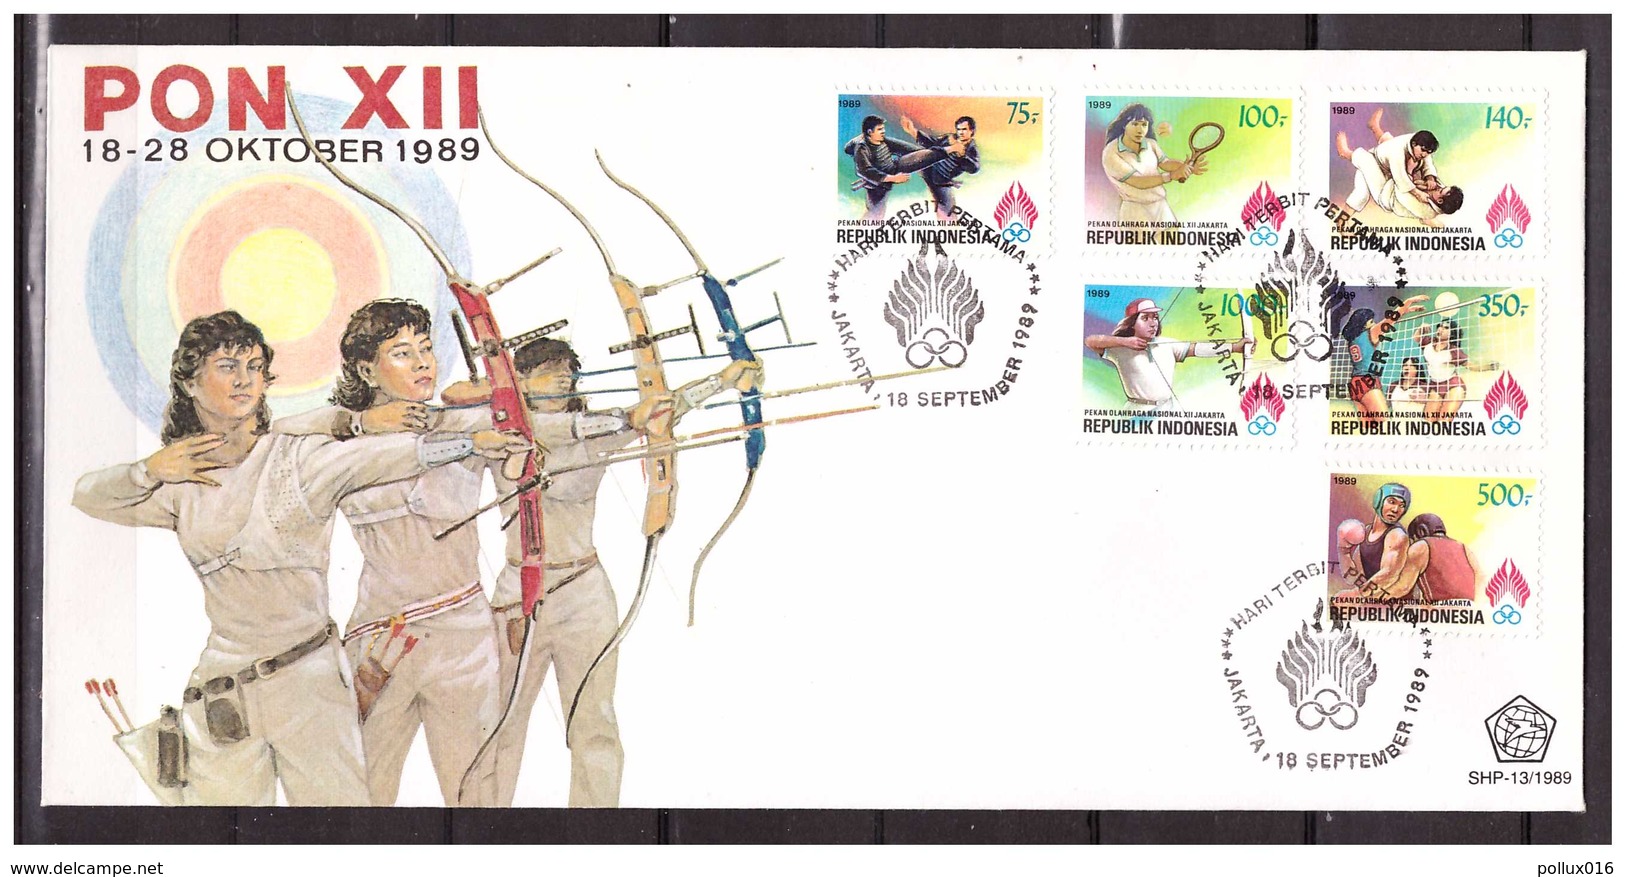 Indonesia 1989 FDC SHP13 PON XII Tennis Karate Judo Boxing Volleyball - Indonesia